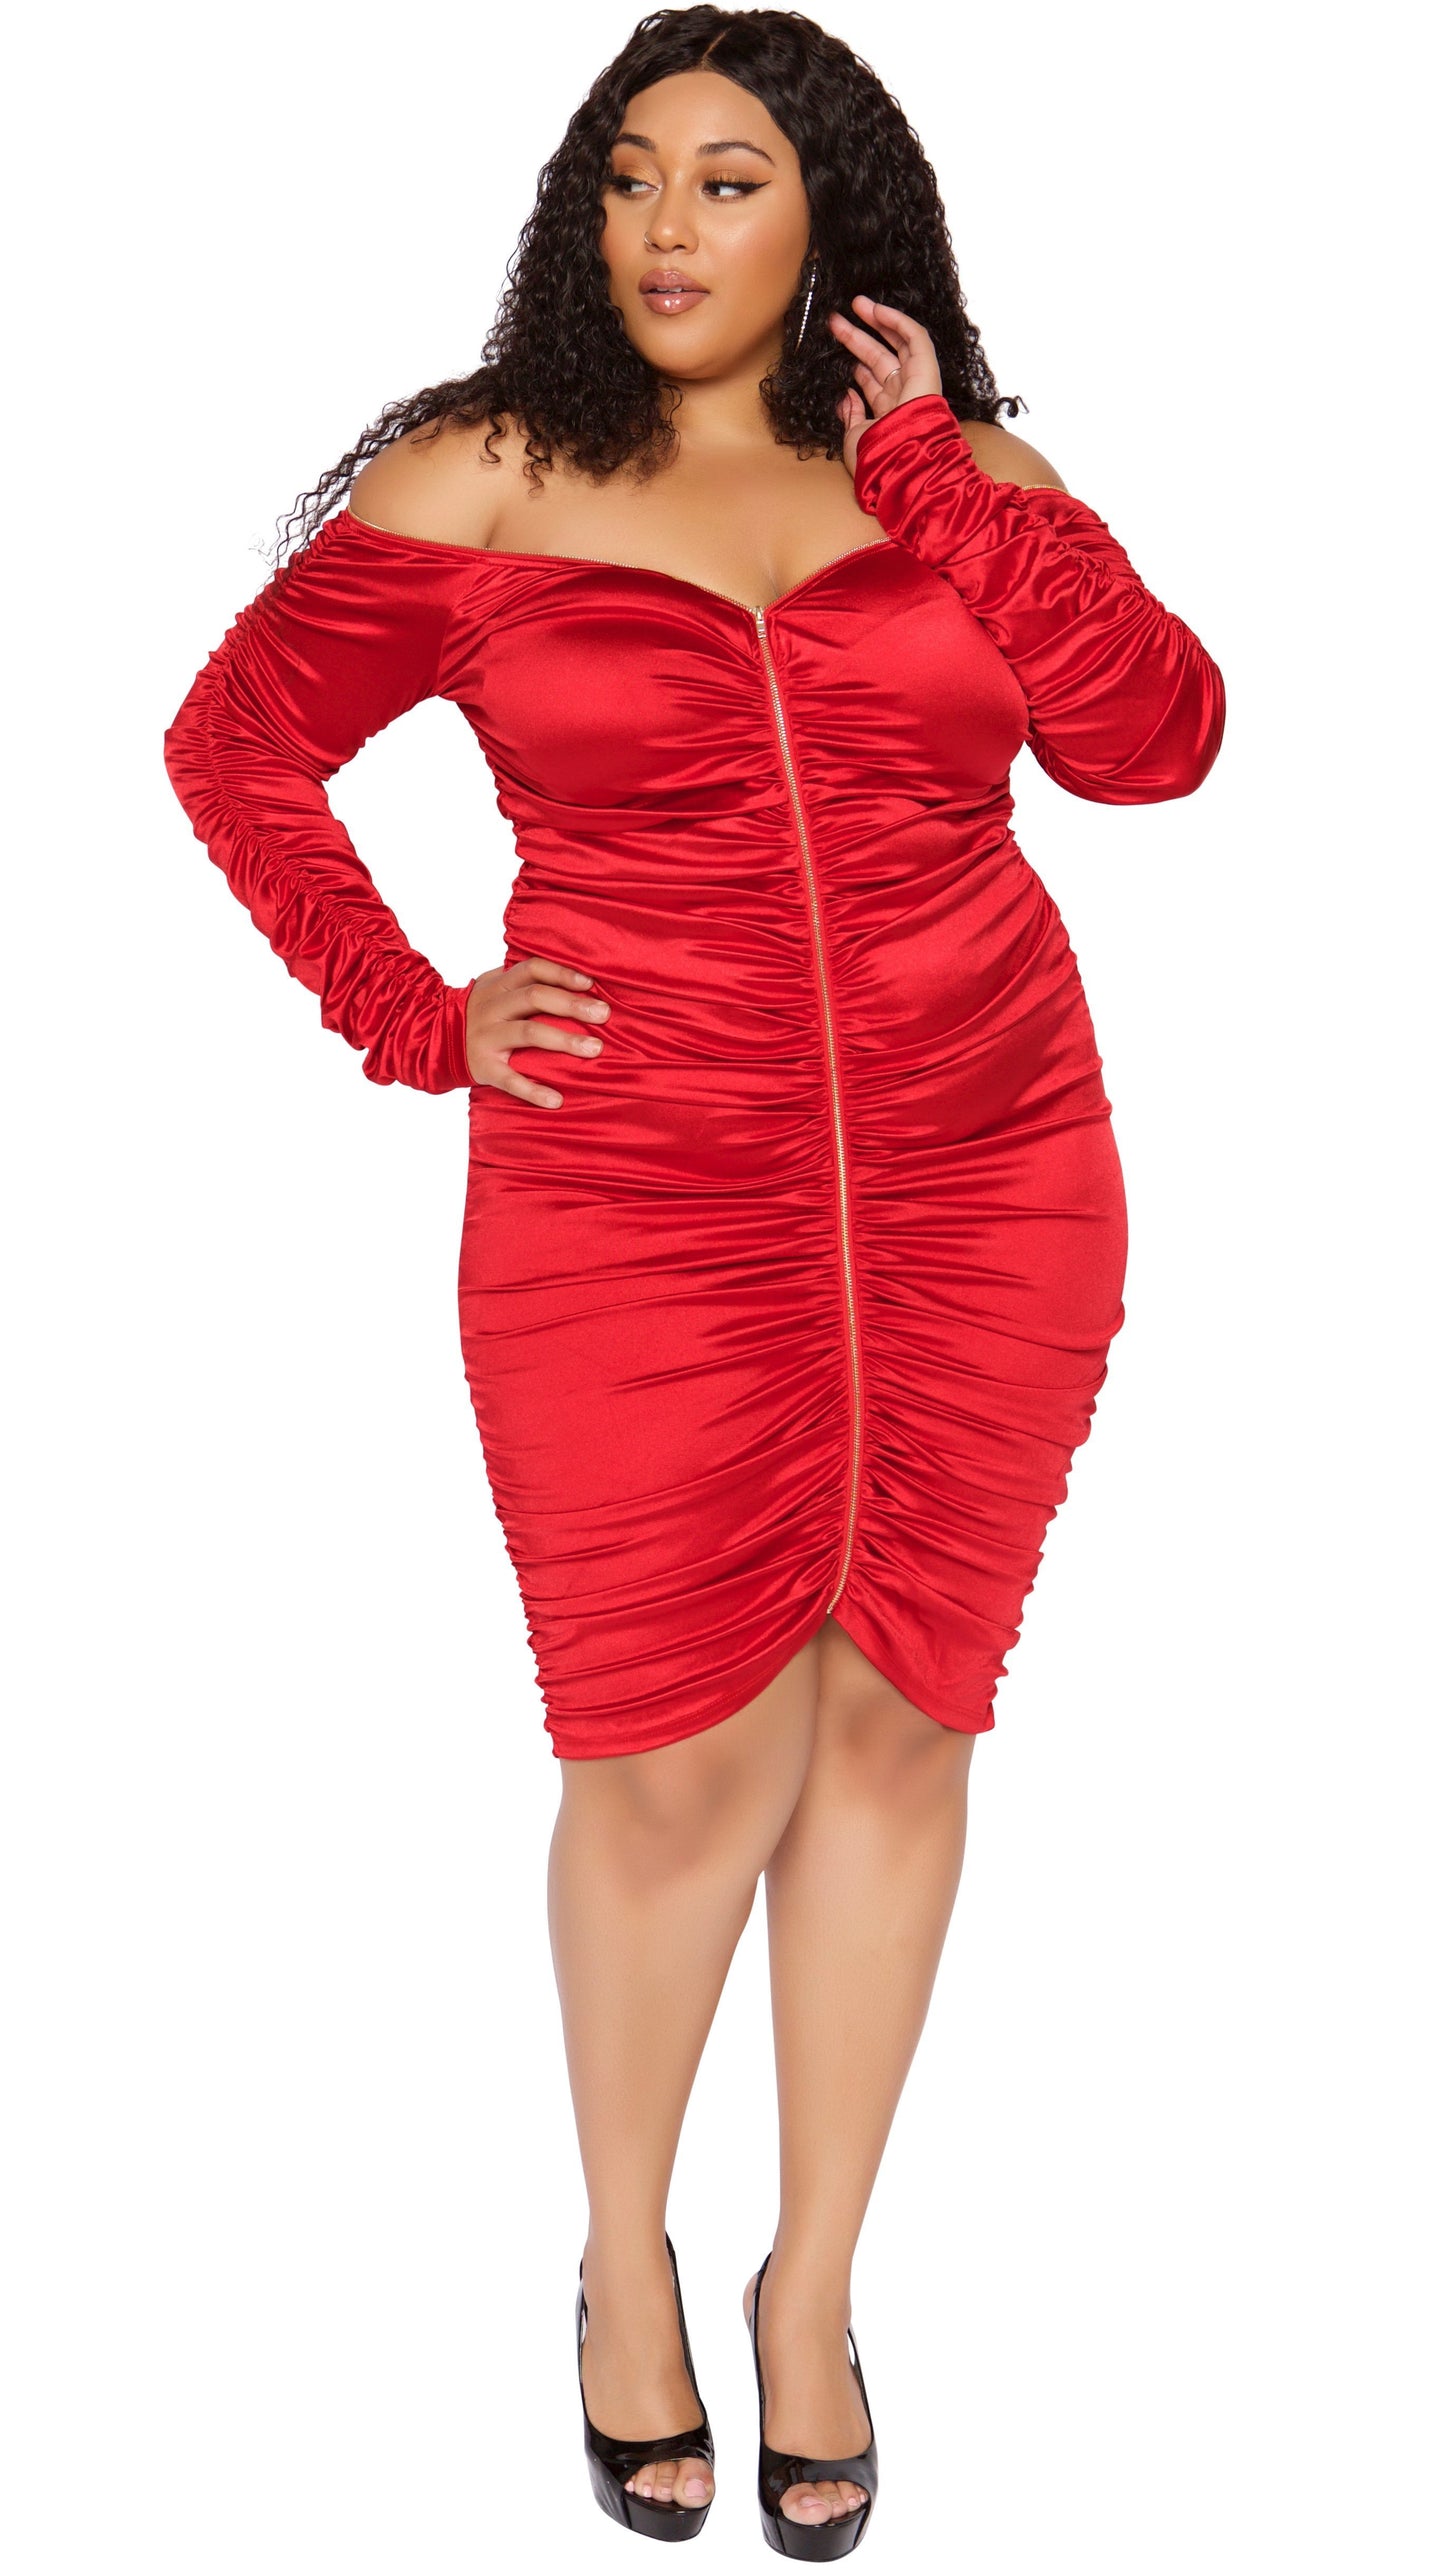 Bossy Bae Ruched Dress (Red)-Dresses-Boughie-Boughie